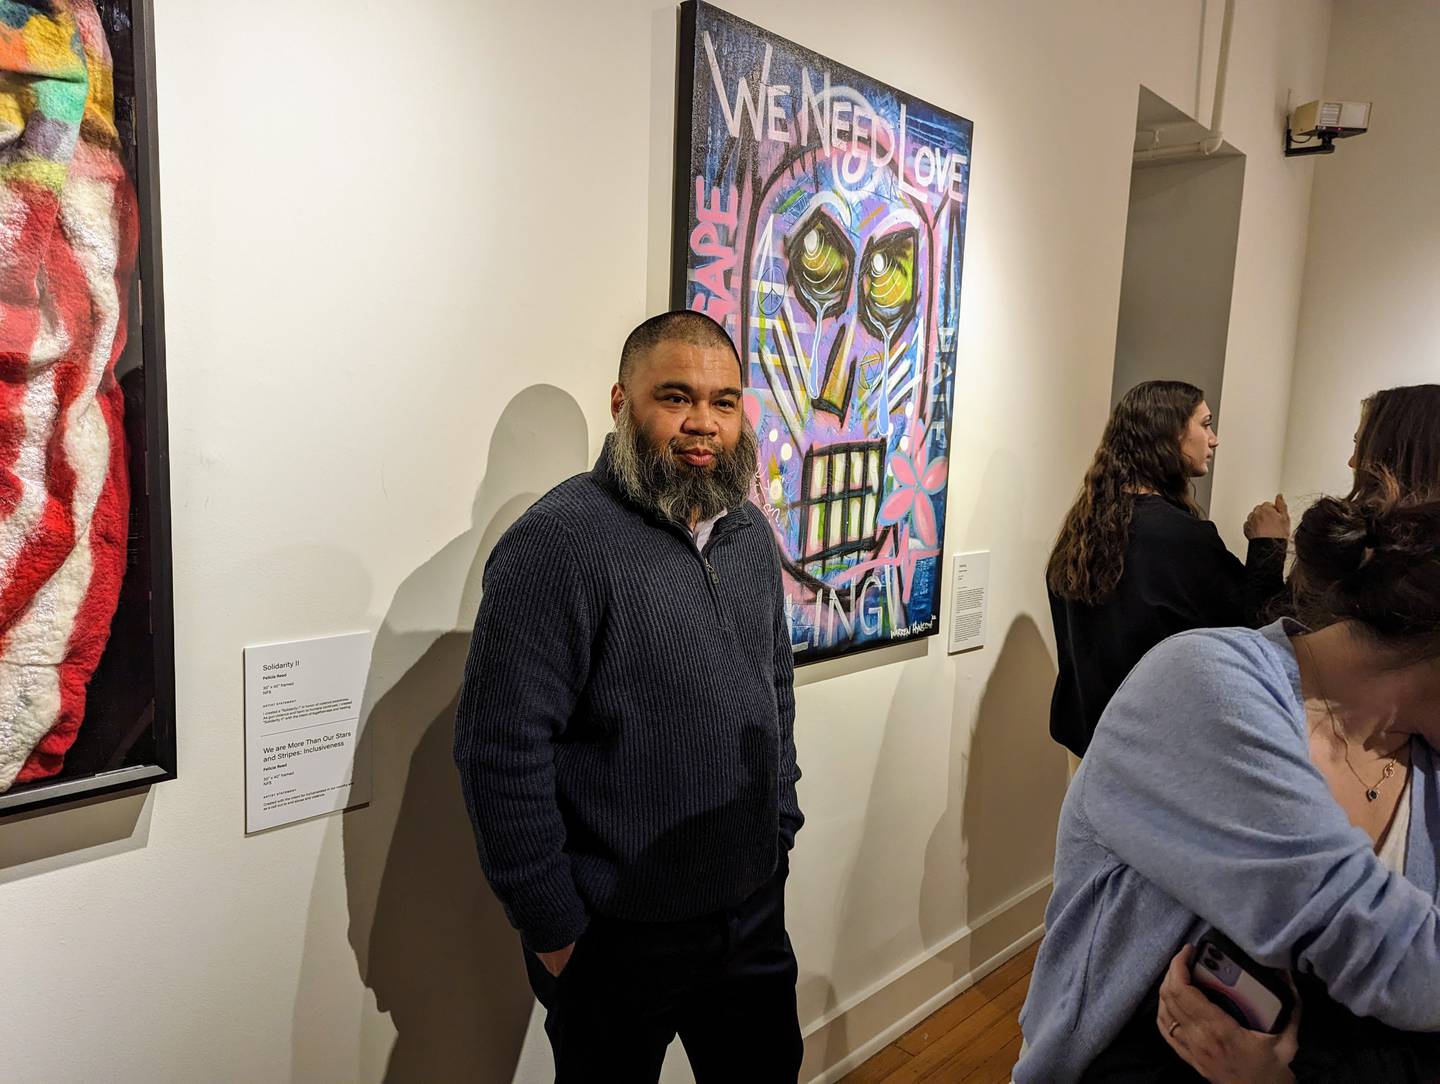 Artist Warren Hynson painted "Healing" to describe his own experience with gun violence. It is part of an exhibit at Maryland Hall through April 3.